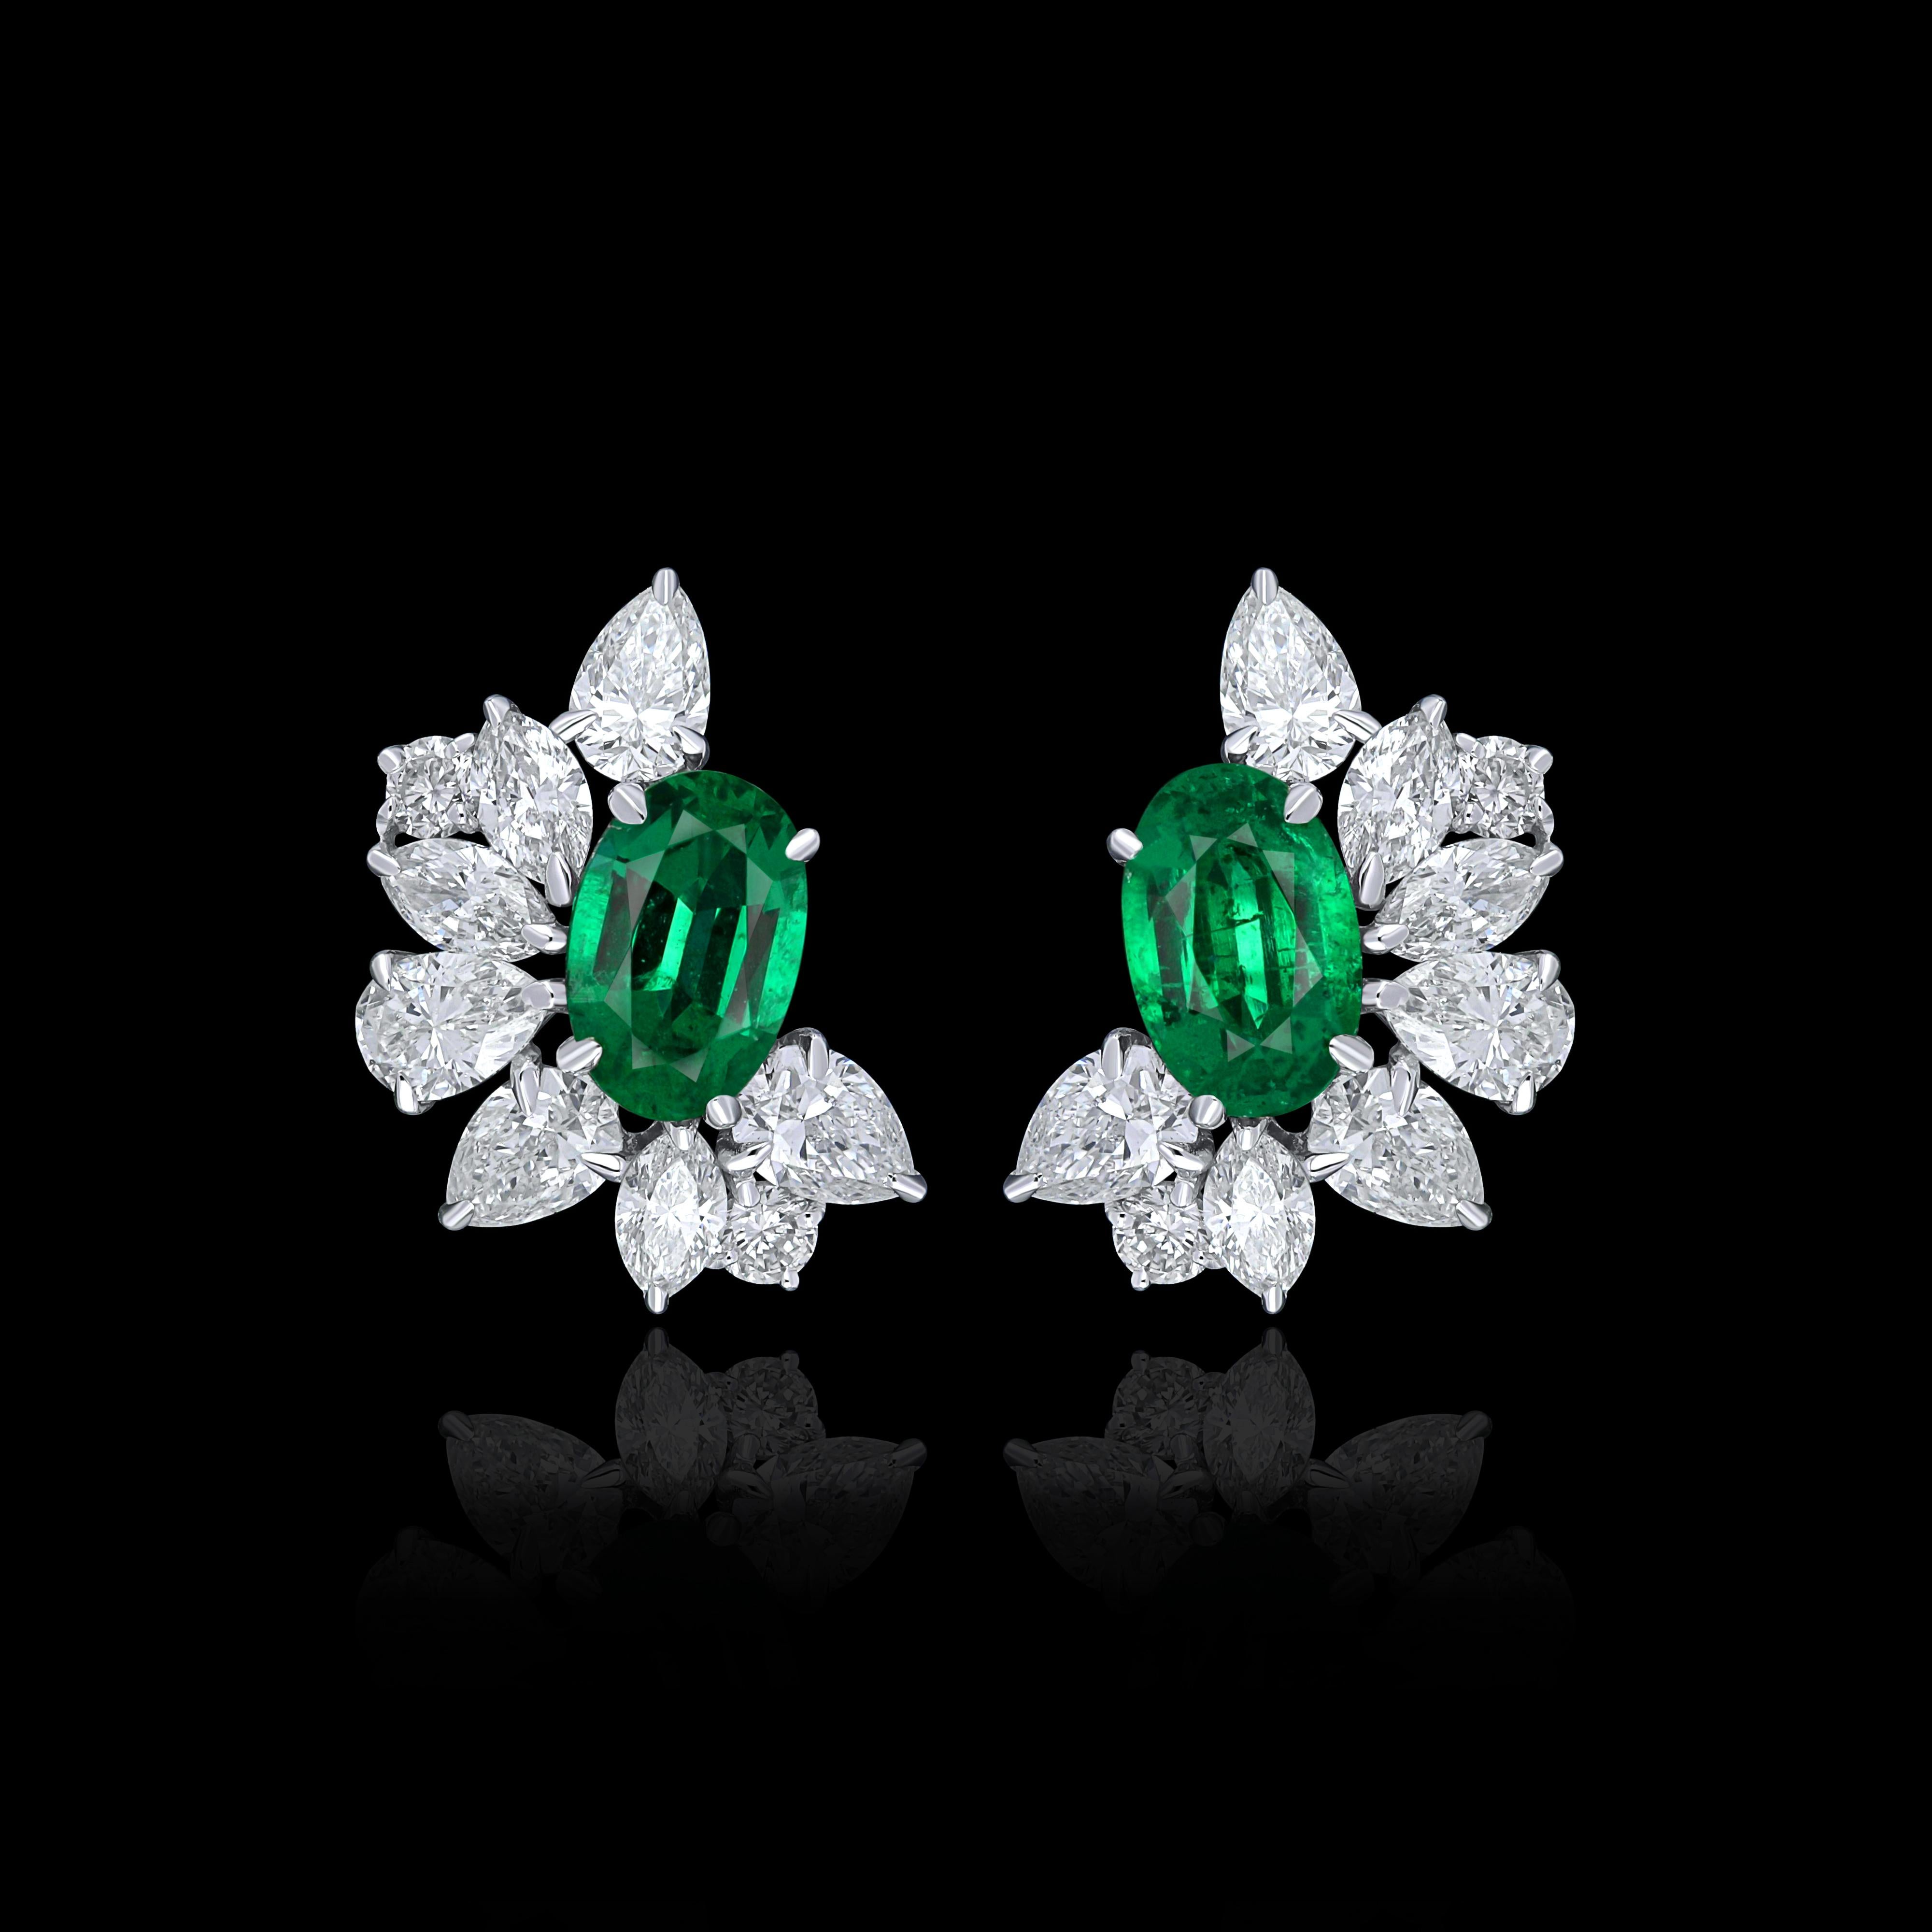 Elegant and exquisitely detailed 18 Karat White Gold Earring, center set with 0.75Cts .Oval Shape Emerald and micro pave set Diamonds, weighing approx. 1.22Cts Beautifully Hand crafted in 18 Karat White Gold.

Stone Detail:
Emerald: 6x4MM

Stone